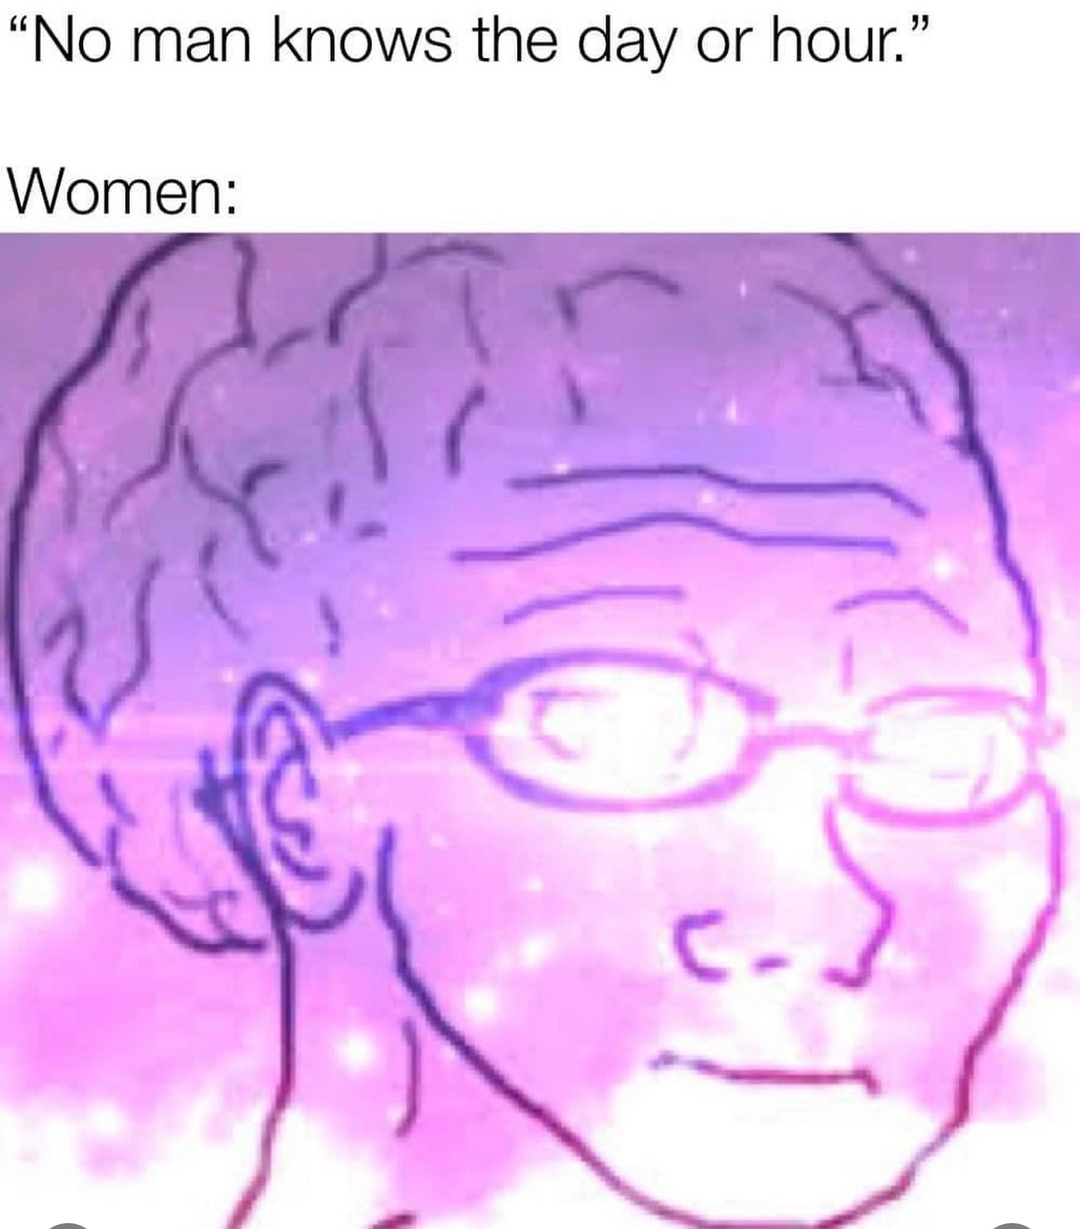 the downfall of man was paying heed to woman - meme